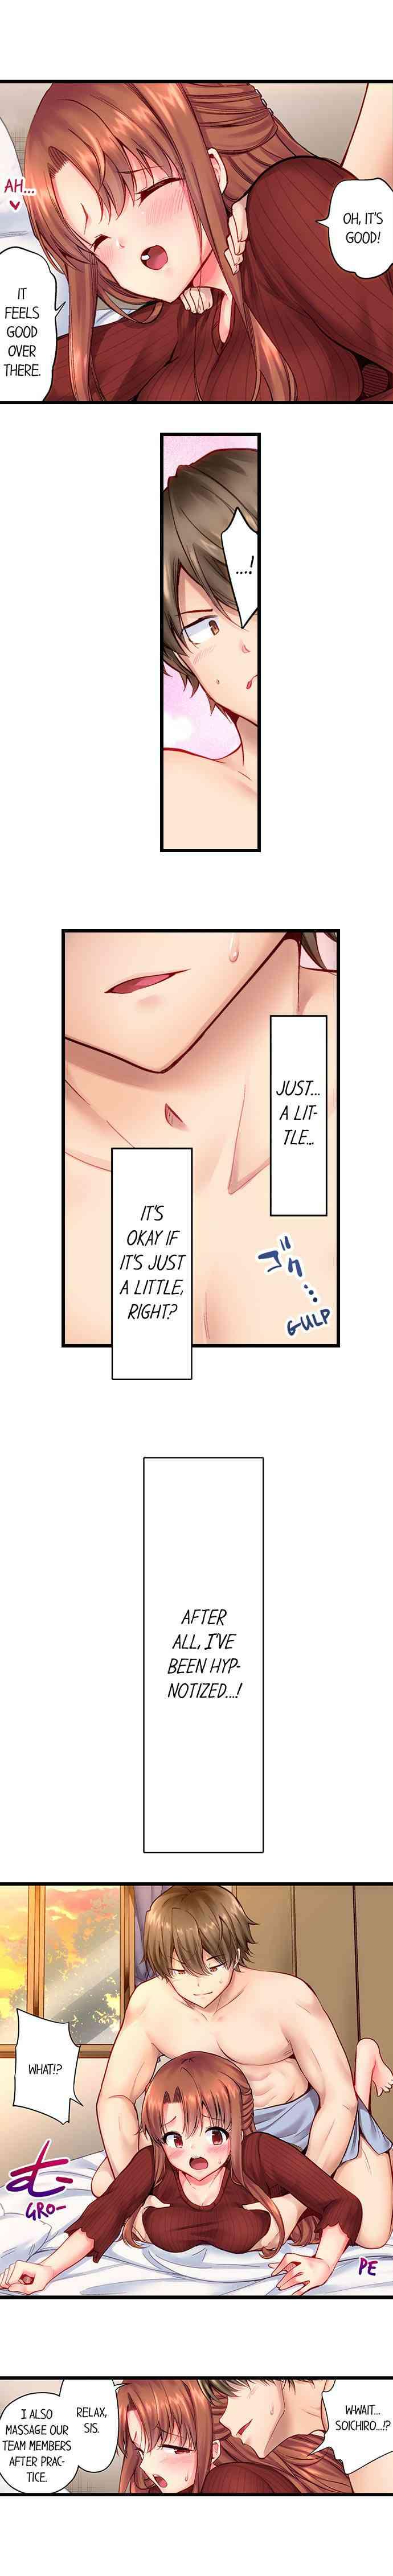 [Yuuki HB] "Hypnotized" Sex with My Brother Ch.5/? [English] [Ongoing]